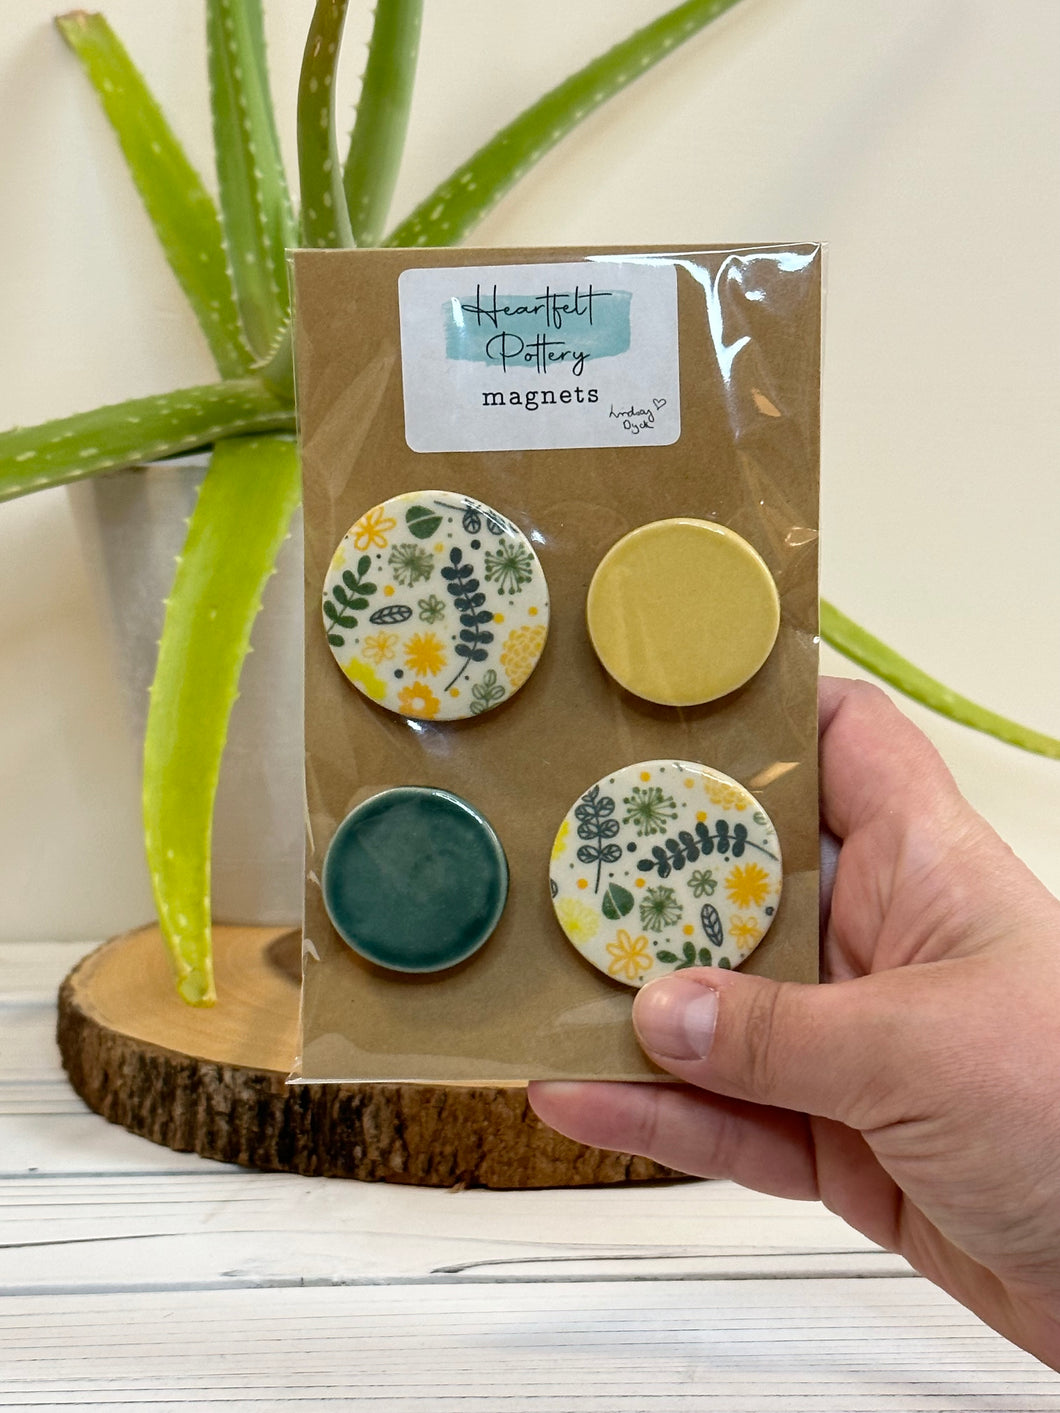 #043 - Yellow and green floral Ceramic magnet set of 4